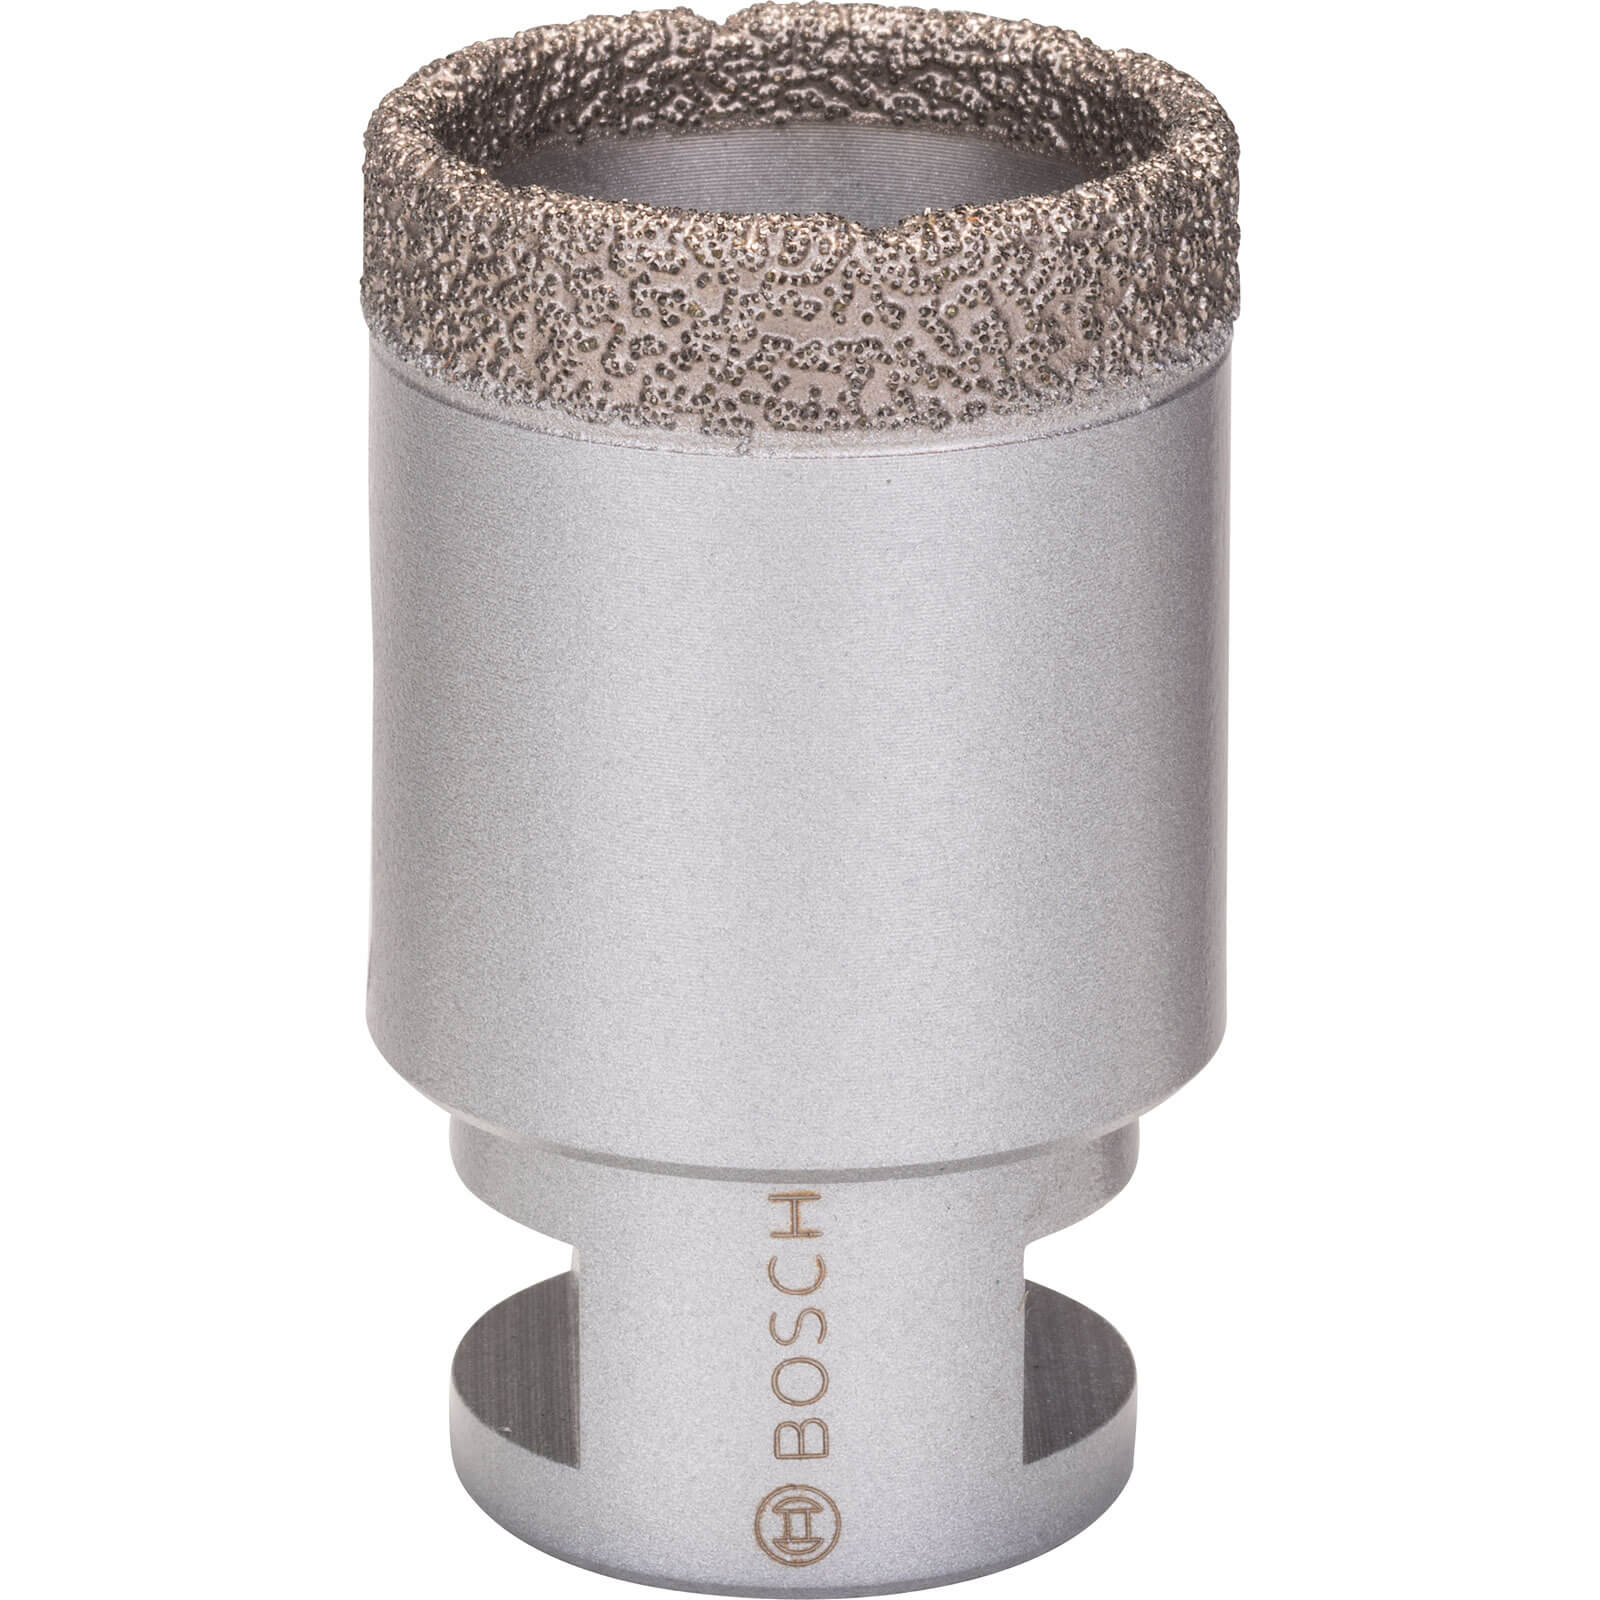 Photo of Bosch Angle Grinder Dry Diamond Hole Cutter For Ceramics 38mm